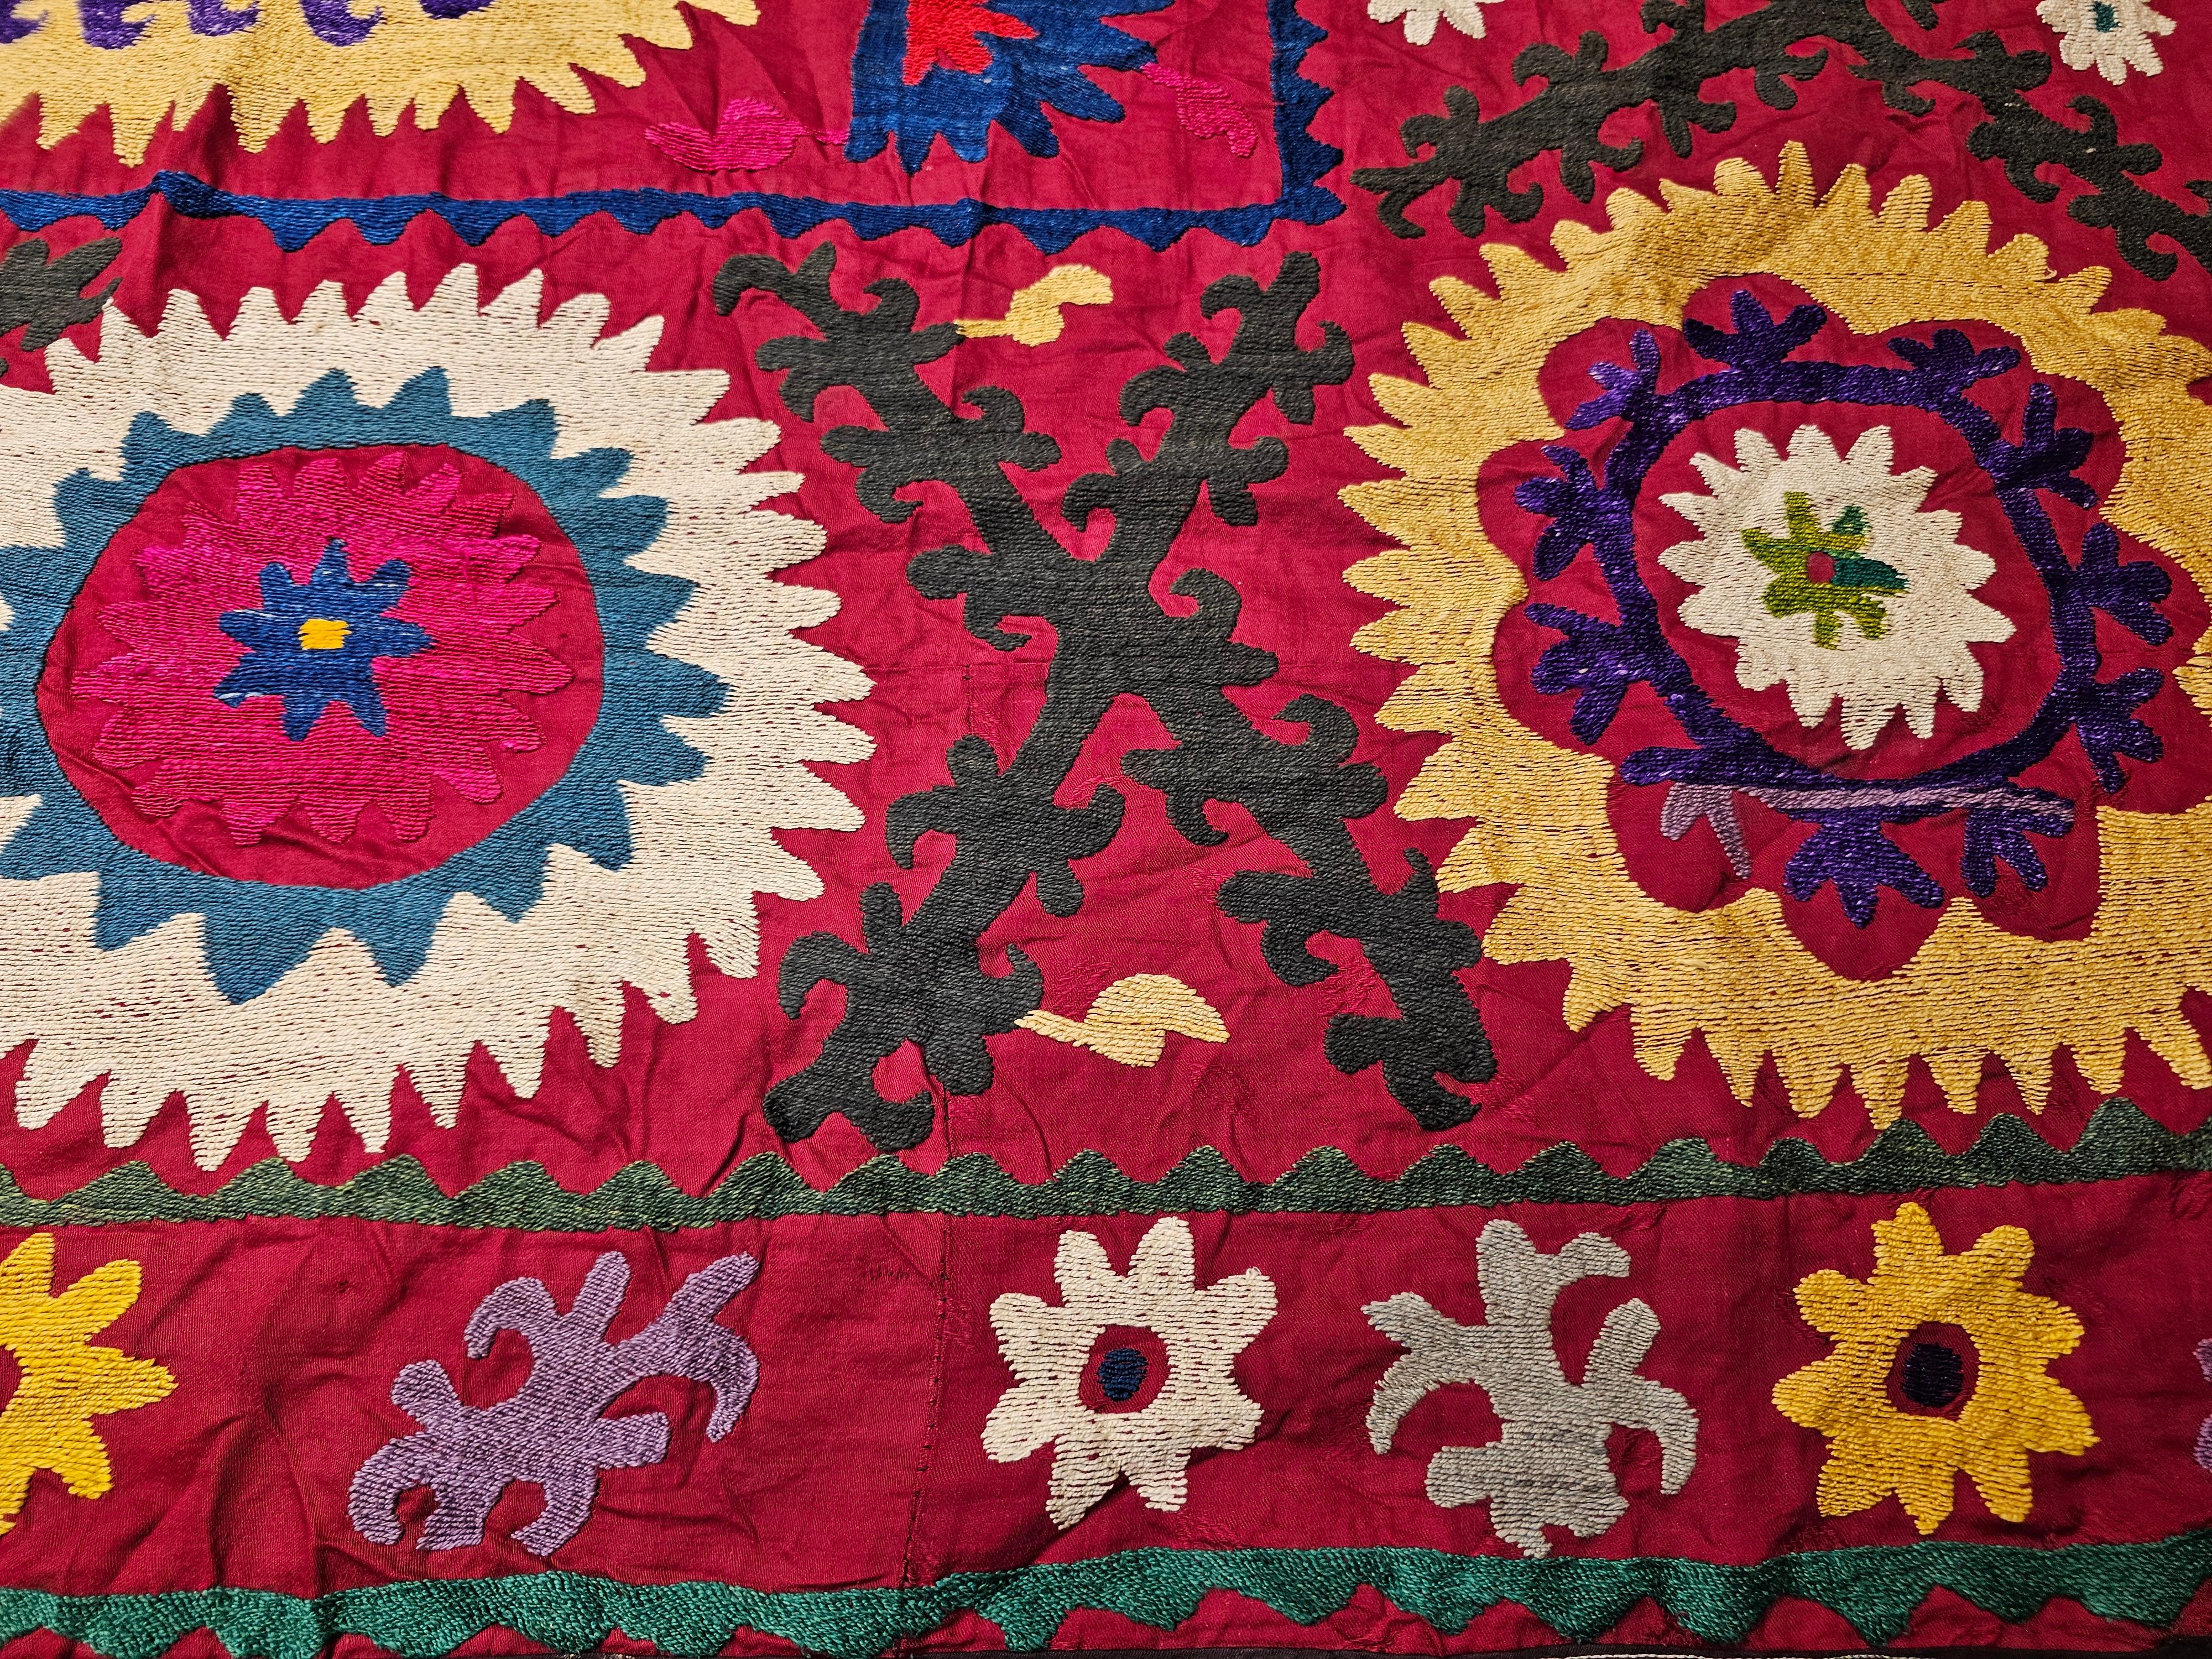 Vintage Uzbek Suzani Silk Embroidery in Crimson Red, Ivory, Blue, Yellow, Black For Sale 5